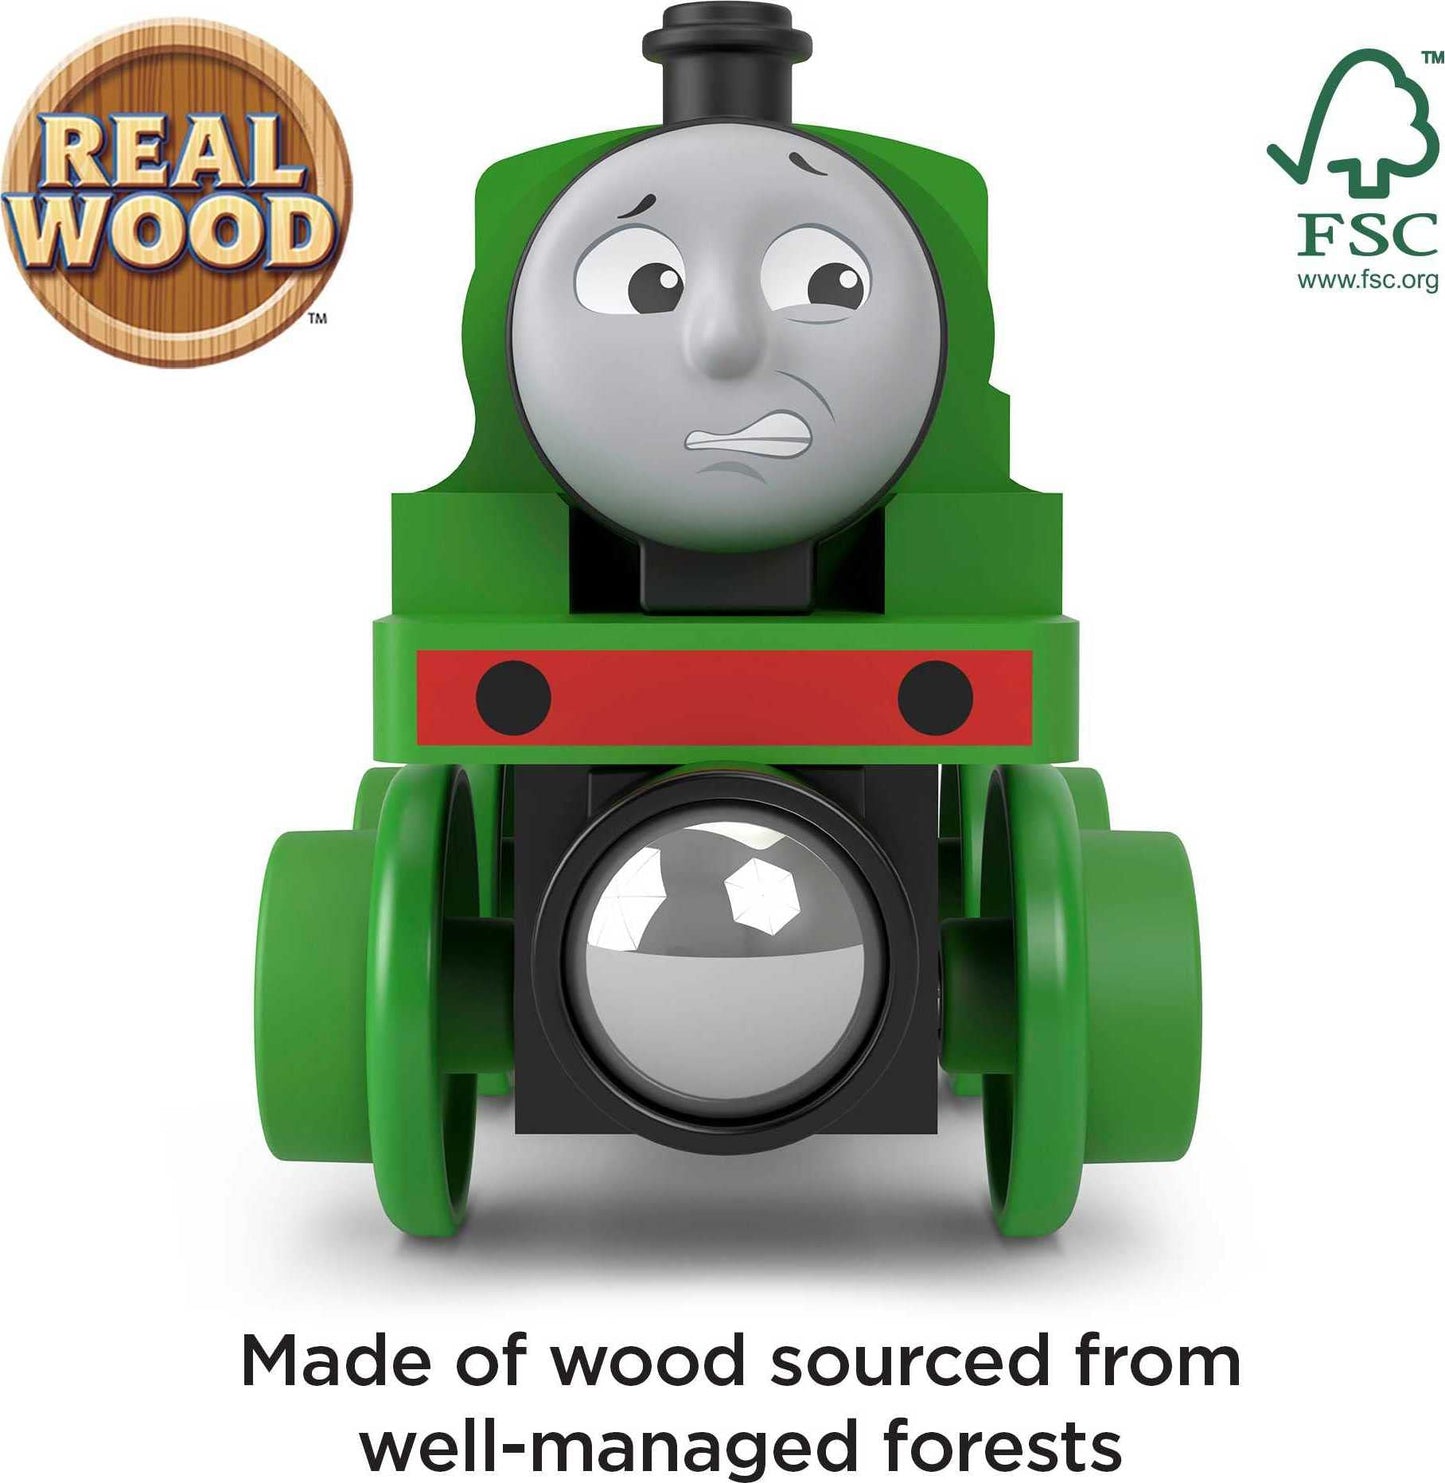 Thomas & Friends Wooden Railway Toy Train Track Tidmouth Sheds Starter Set With Percy Wood Engine For Ages 3+ Years